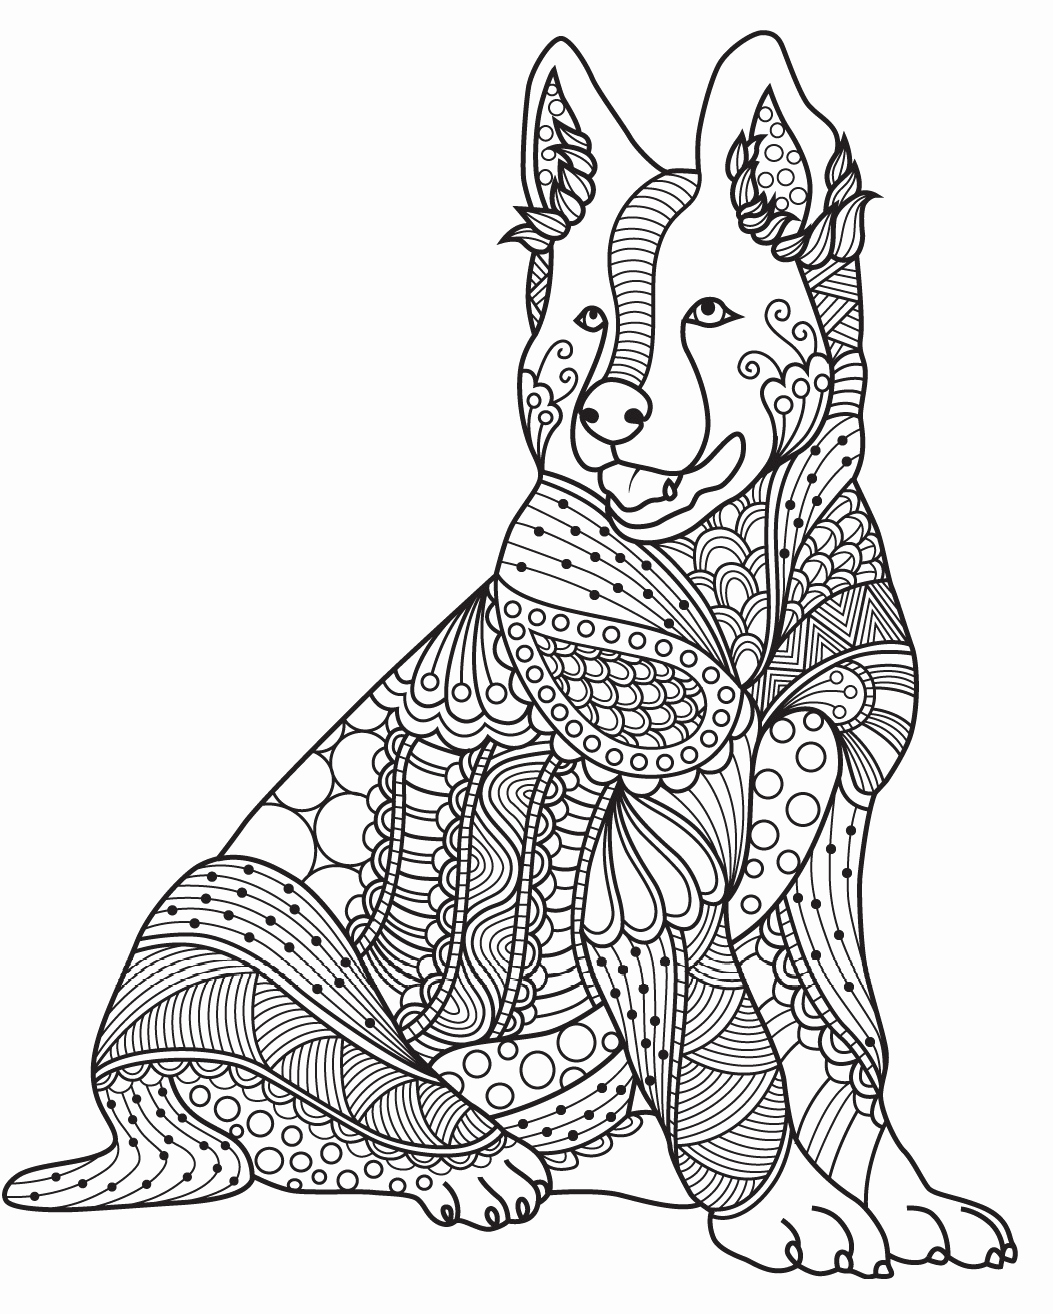 images-of-dog-coloring-pages-cute-dog-coloring-pages-coloring-pages